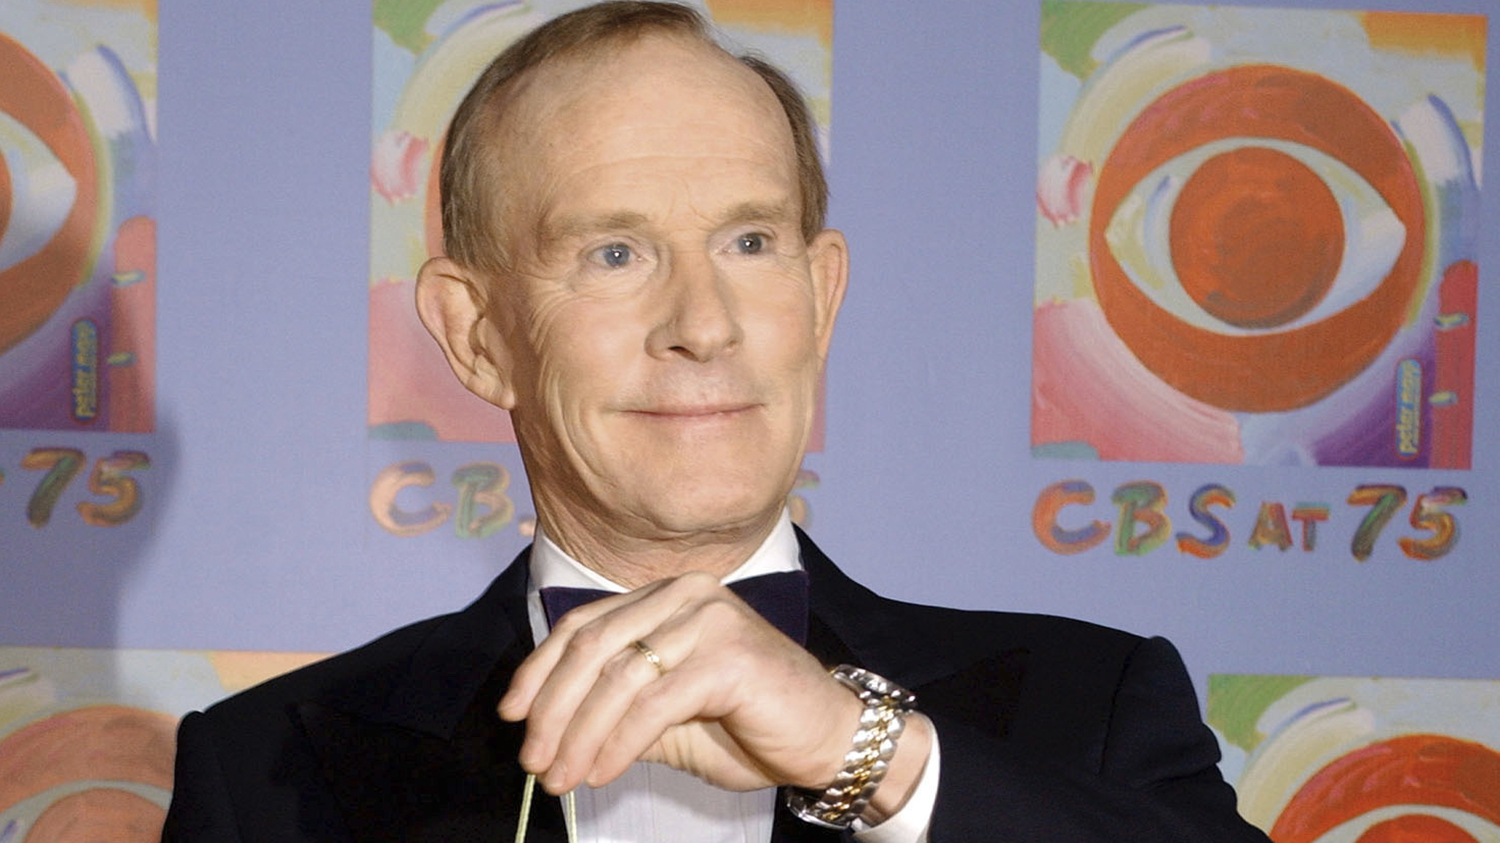 Tom Smothers does yo-yo tricks during arrivals at CBS' 75th anniversary celebration on Nov. 2, 2003, in New York.